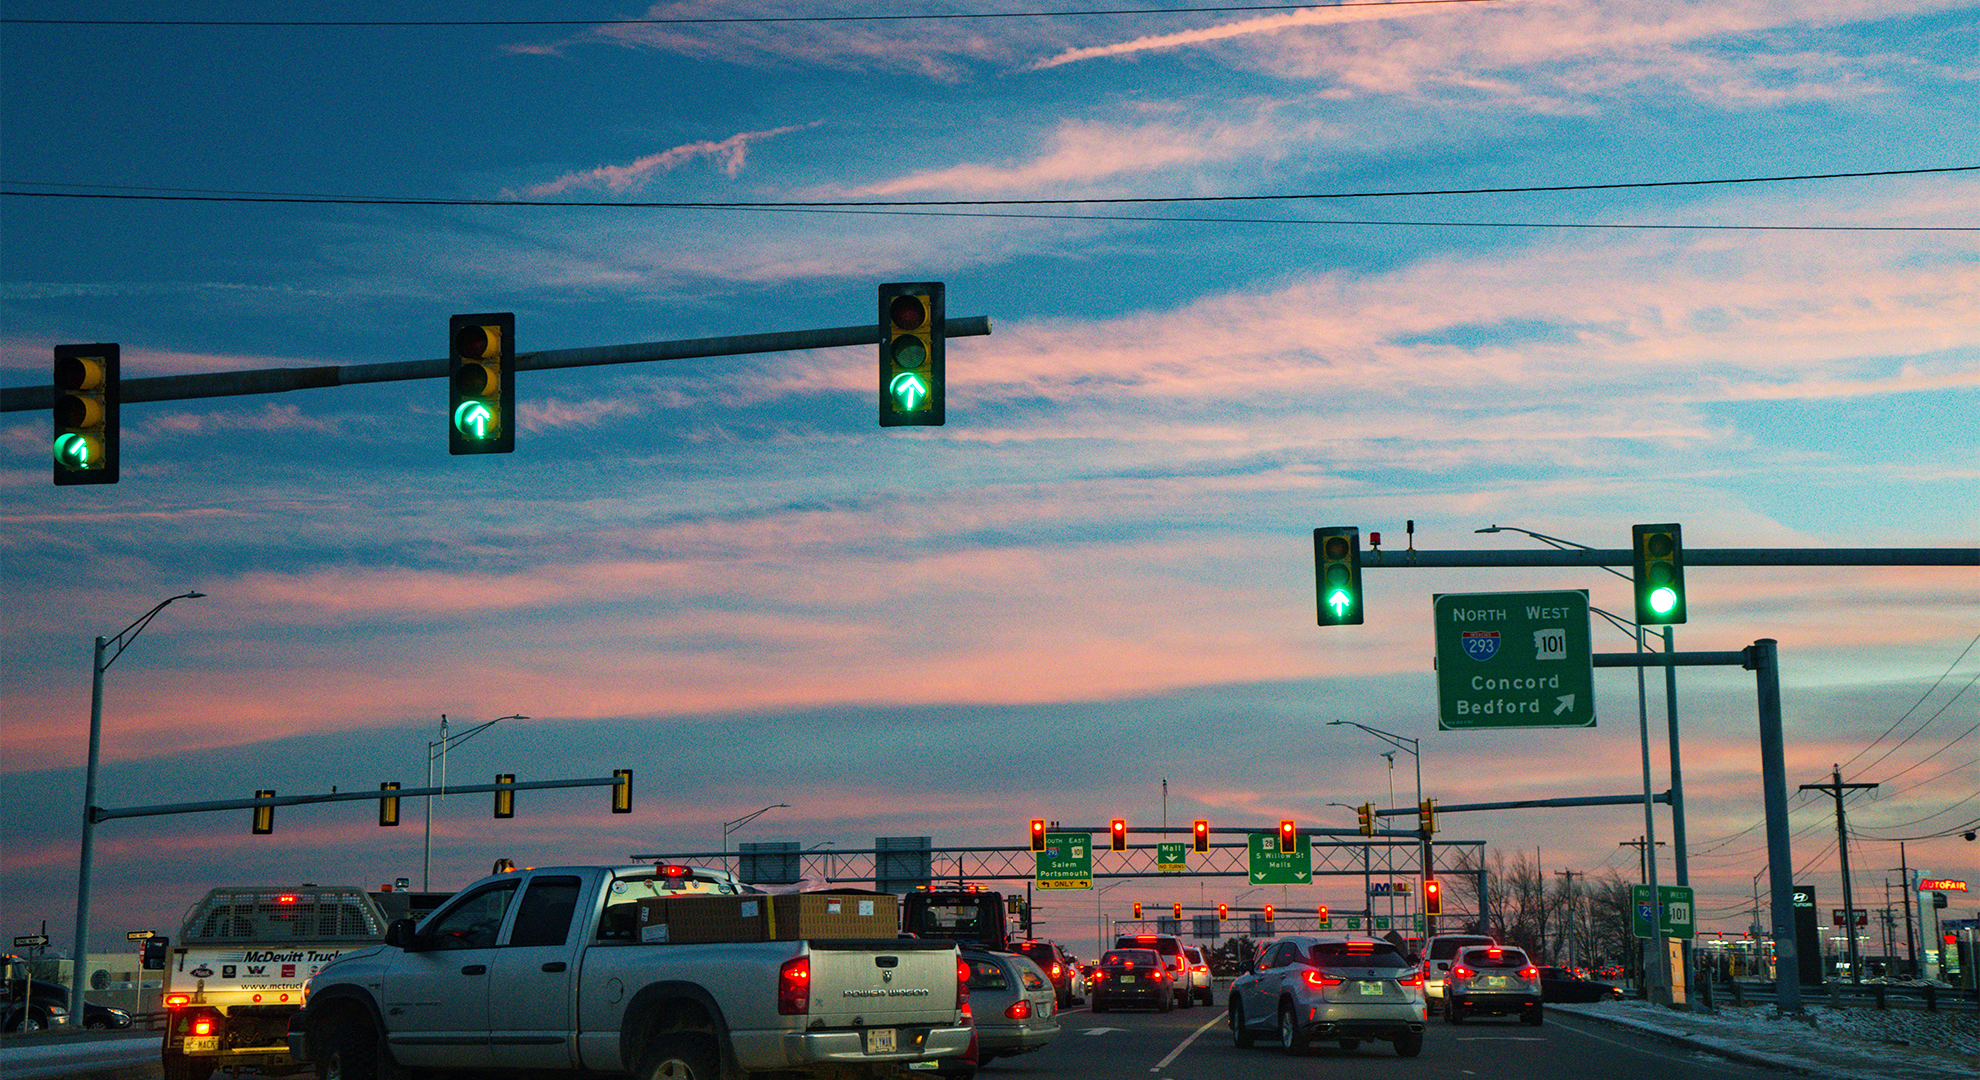 Cars waiting at traffic signals with sunset in background